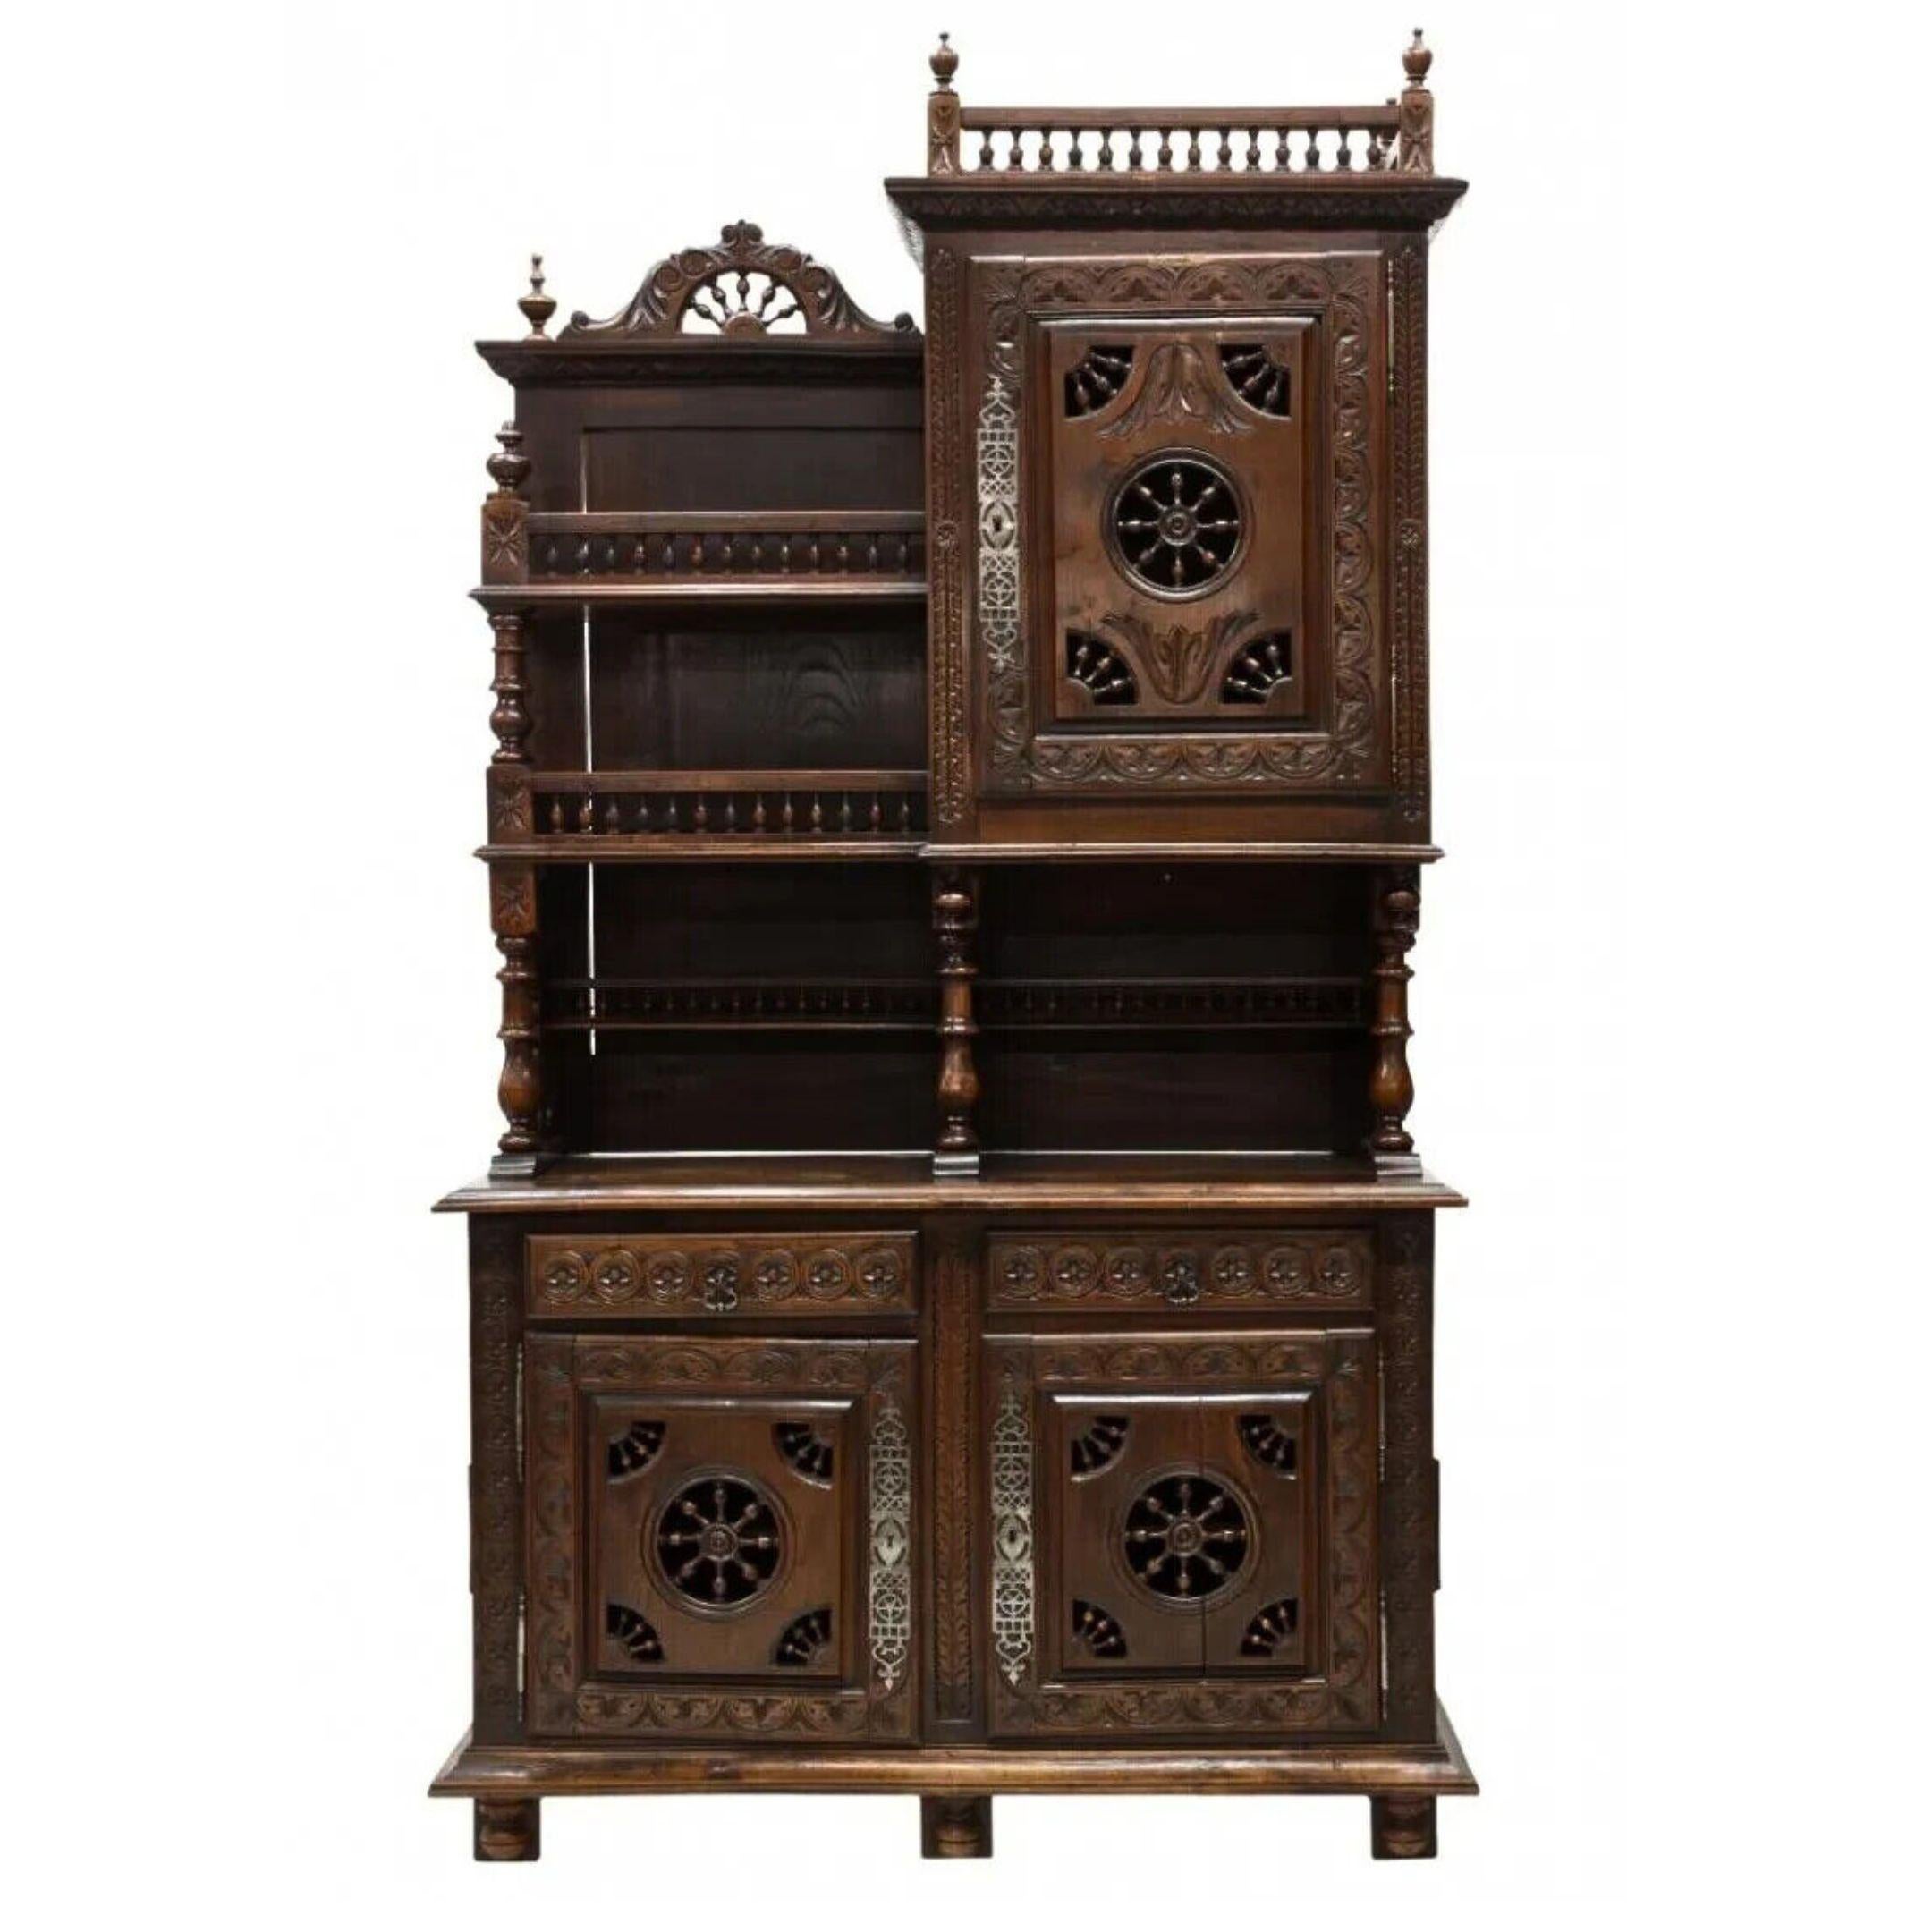 Stunning Antique Sideboard, Fine Breton Display, Spindle, Foliate, Shelves, 19th Century, 1800's, 19th Century!

This exquisite antique sideboard boasts intricate spindle and foliate carvings on dark wood tones, making it a stunning addition to any